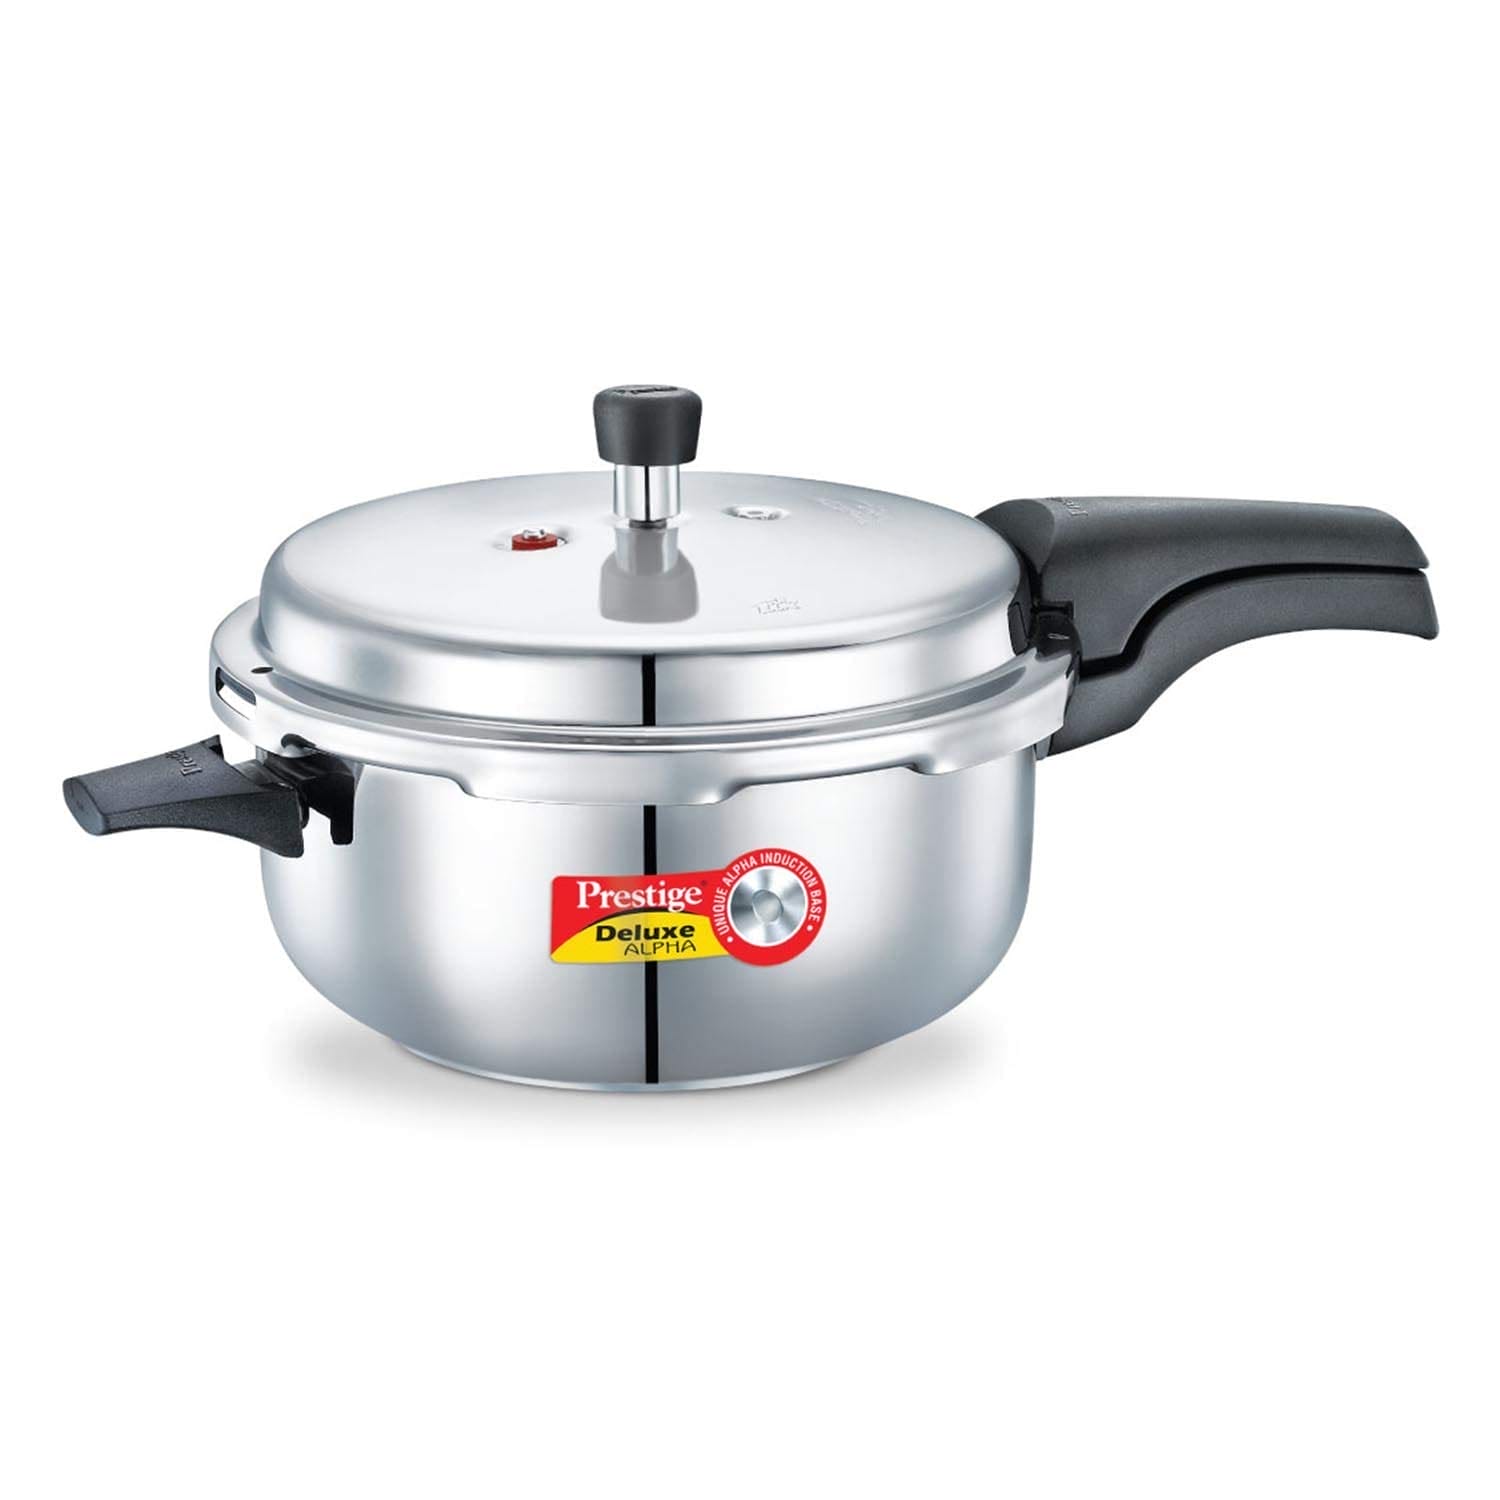 10 best stainless steel pressure cookers tested reviewed 1145 26 8